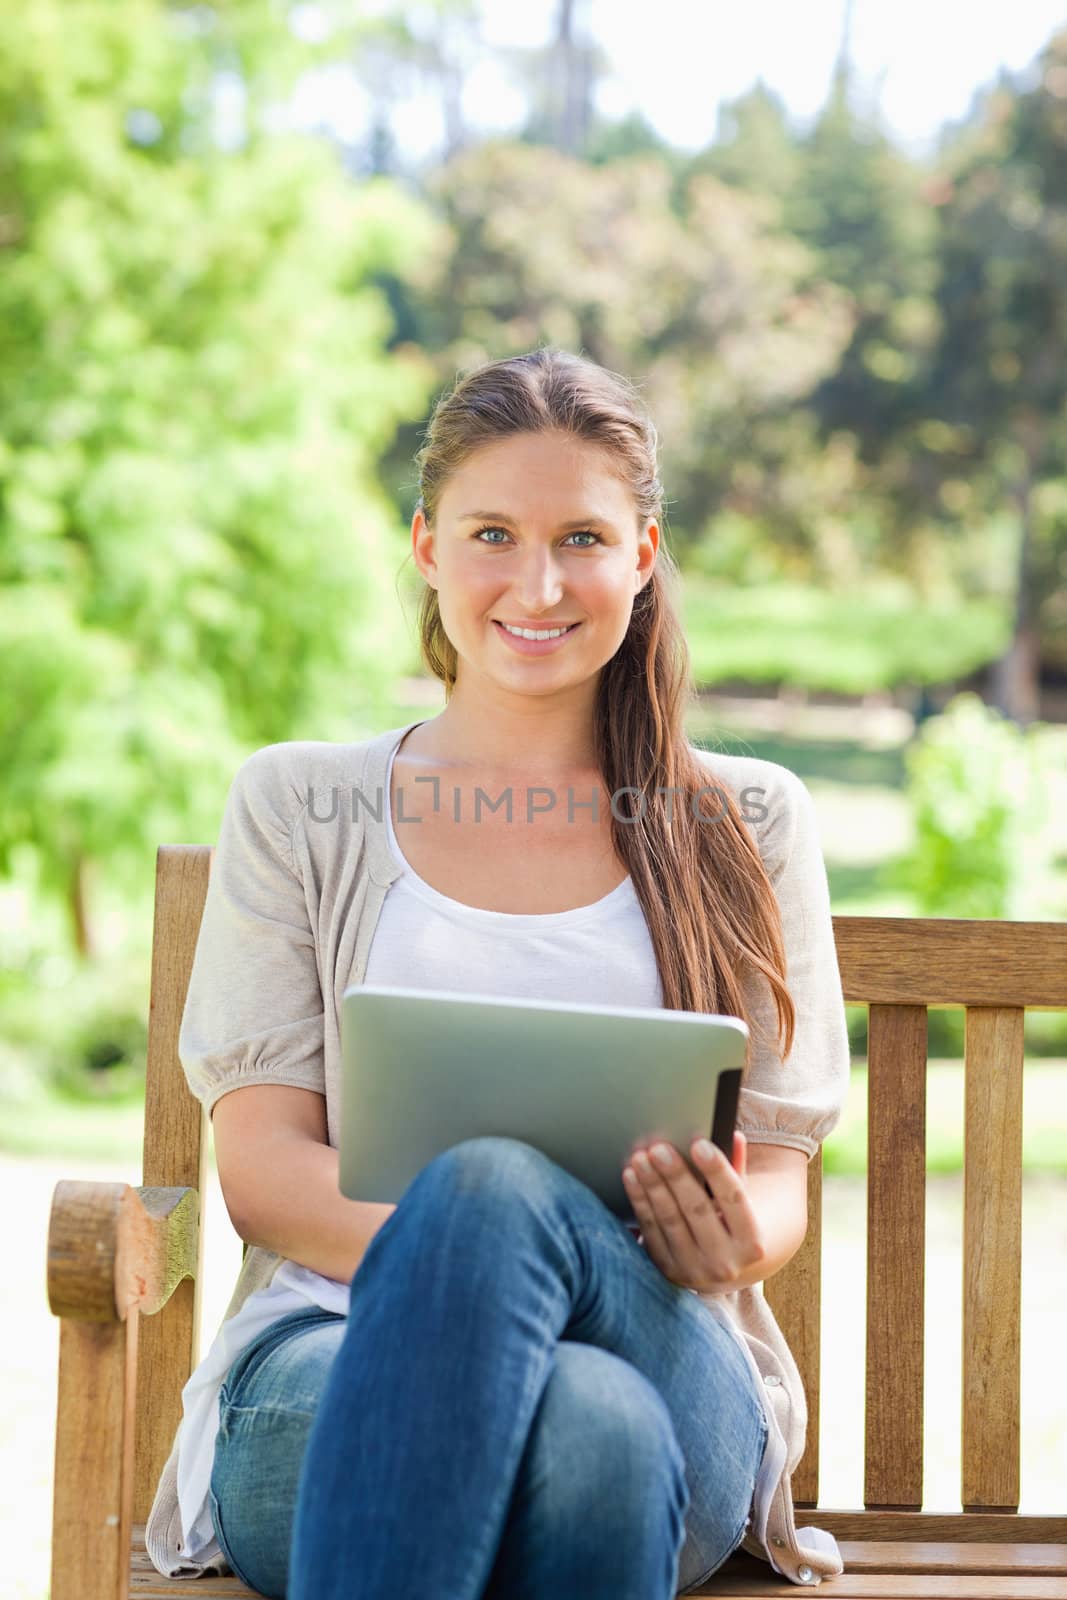 Smiling woman on a park bench with a tablet computer by Wavebreakmedia